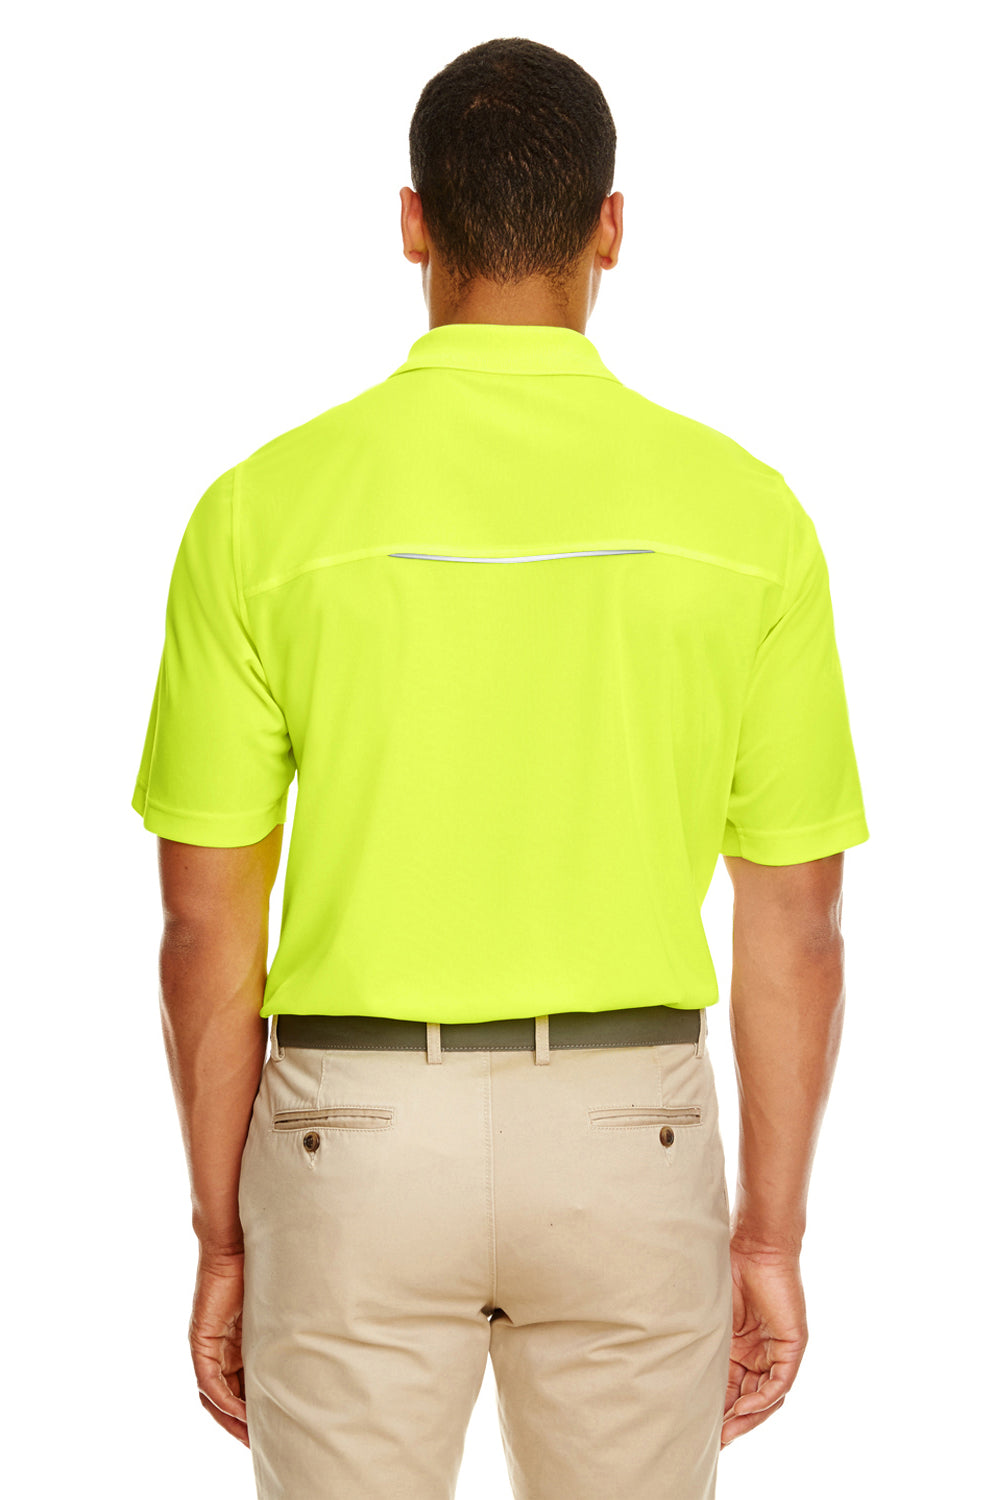 Core 365 88181R Mens Radiant Performance Moisture Wicking Short Sleeve Polo Shirt Safety Yellow Back